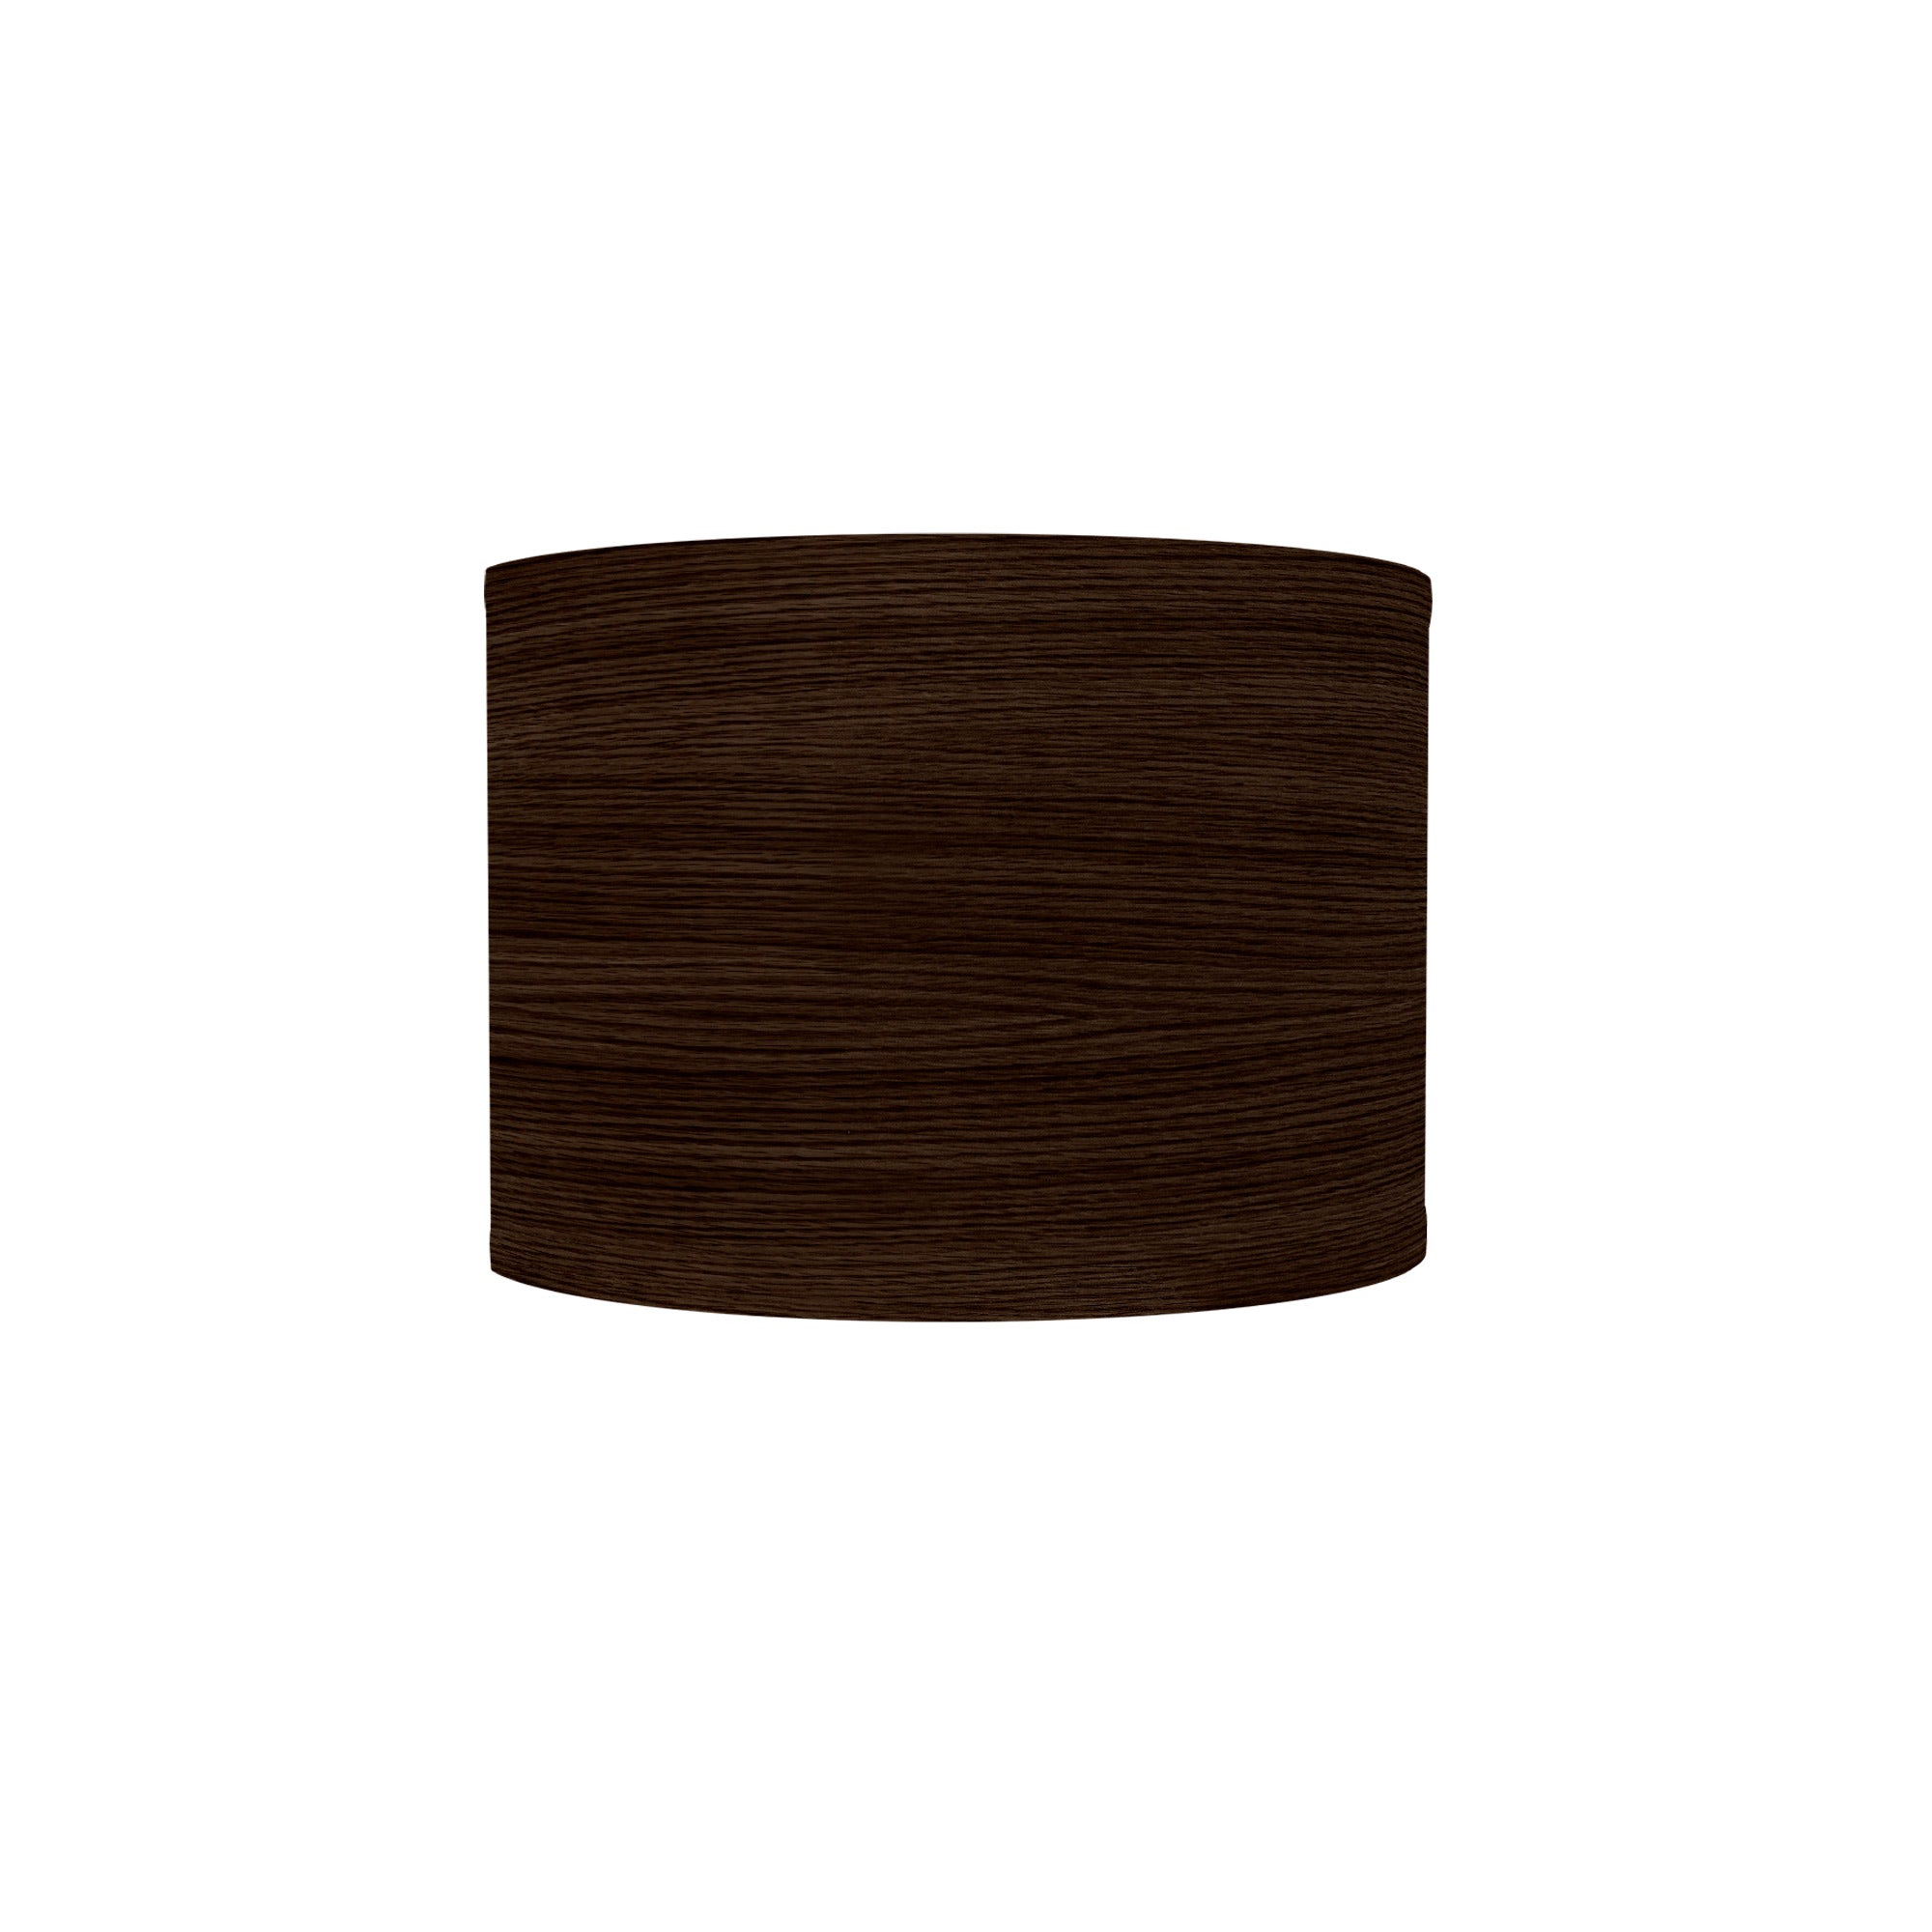 The Bryce Wall Sconce from Seascape Fixtures with a photo veneer shade in chocolate color.